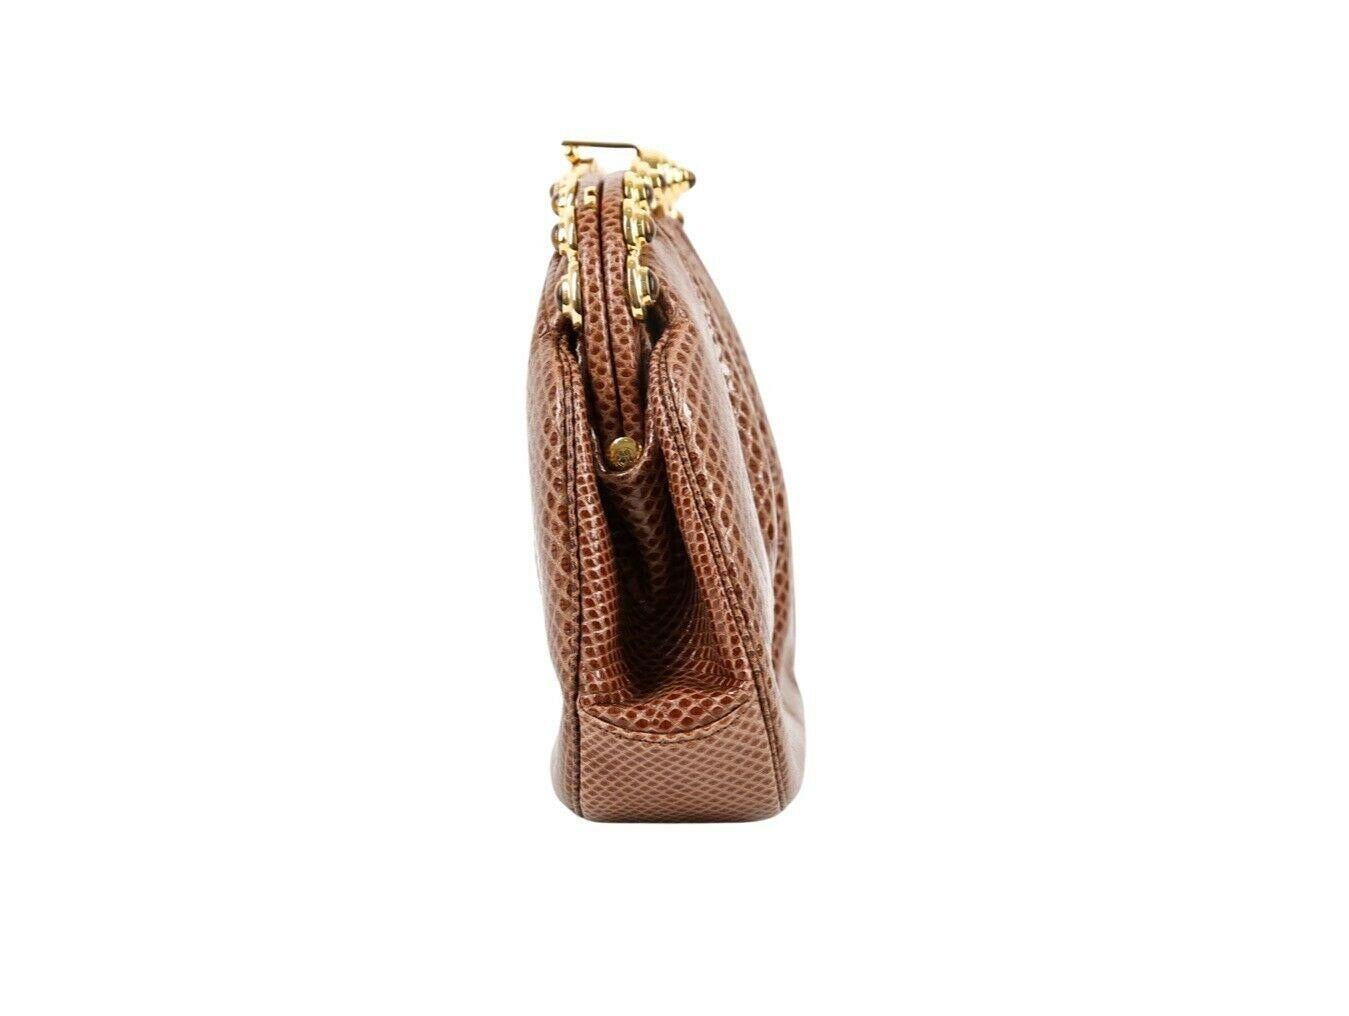 This exquisite Lizard leather bag with stone detailed opening by Judith Leiber is just breathtaking. Wear as a Cross-Body, Shoulder or Clutch bag. Truly a collector's item with lots of wear still left.

Colour
Tan
Metal